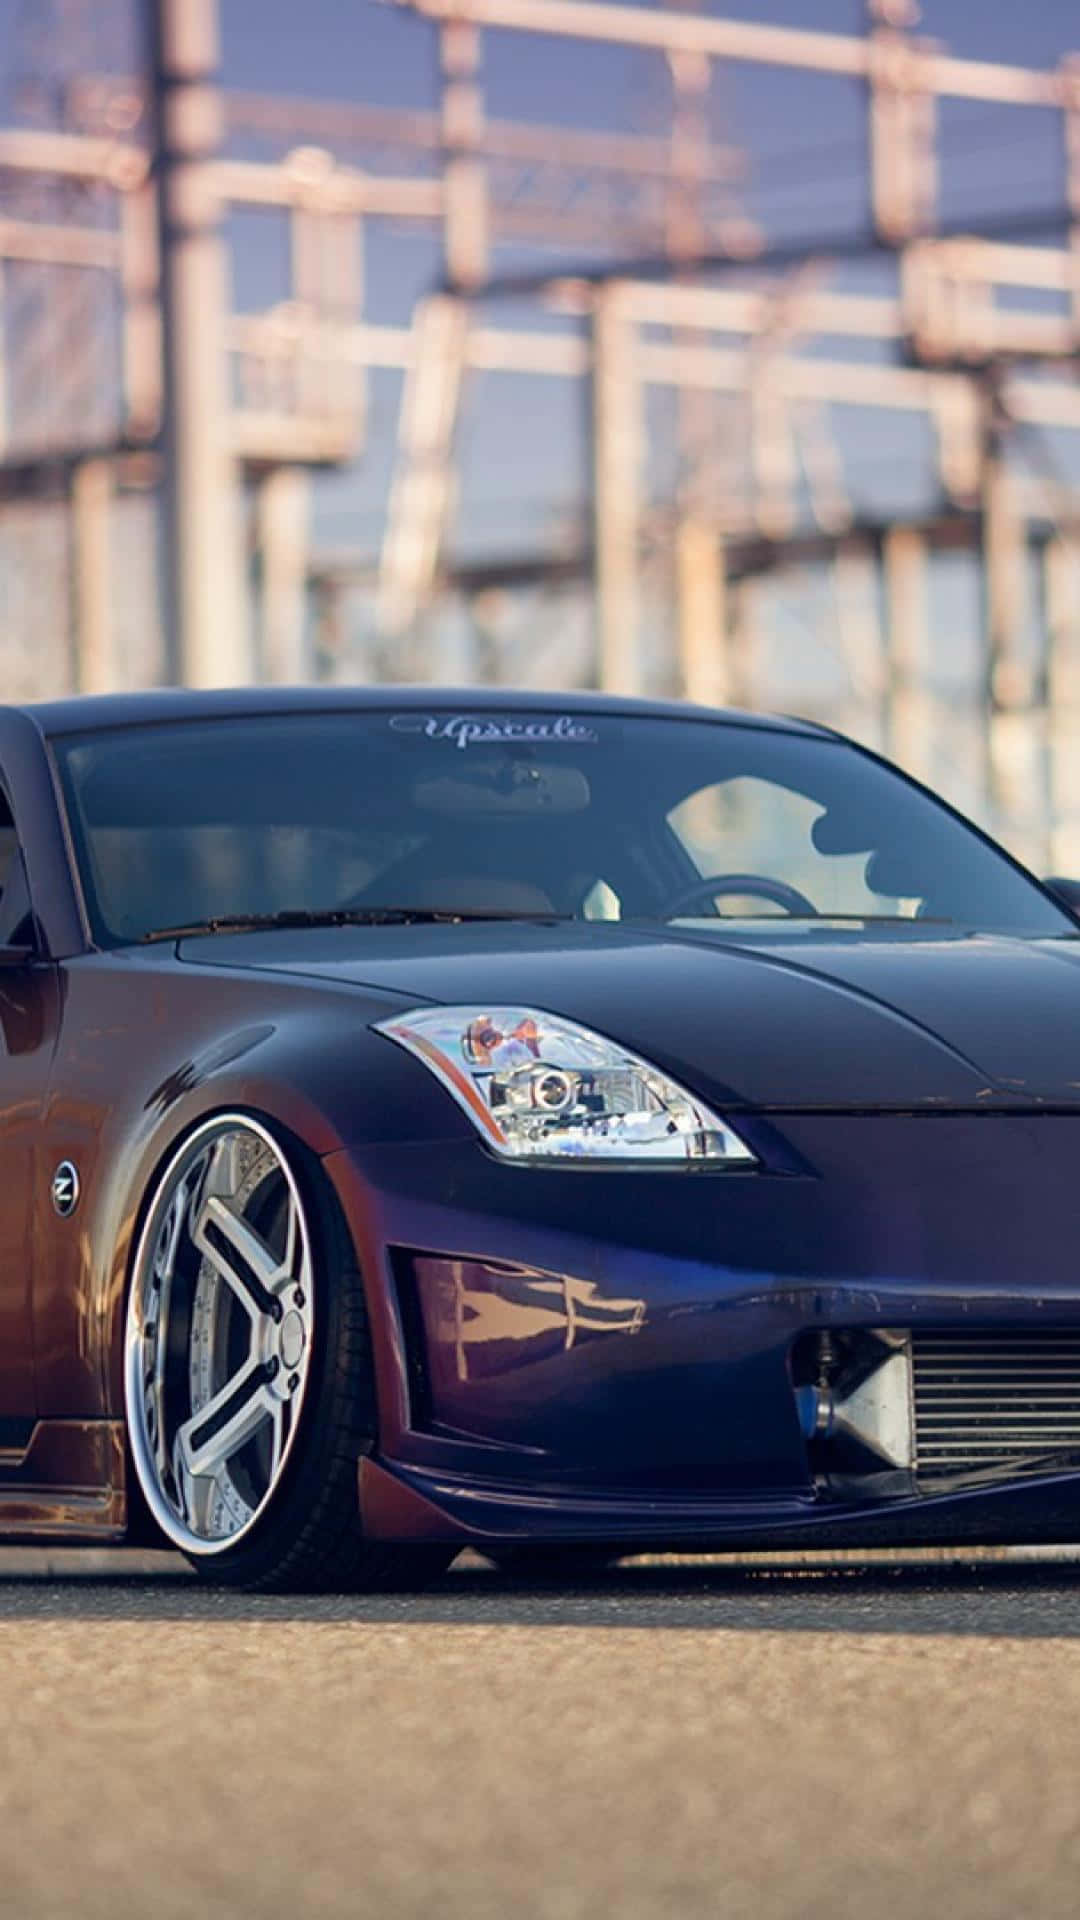 Supercharged Nissan 350z on the race track Wallpaper